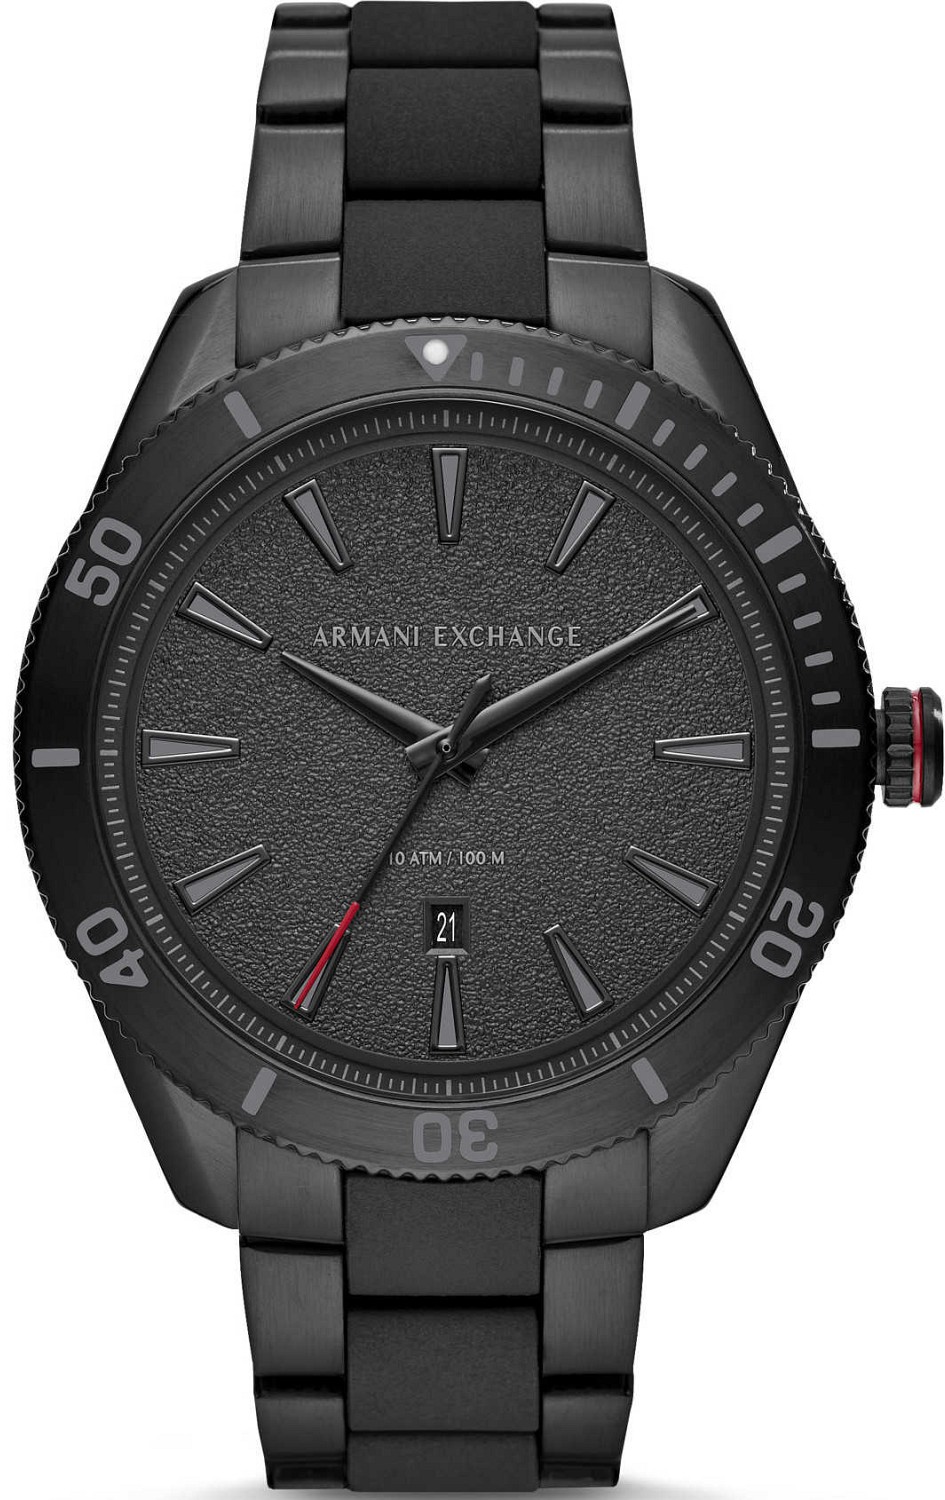 Enzo Mechana EMV01 for Rs.95,476 for sale from a Private Seller on Chrono24